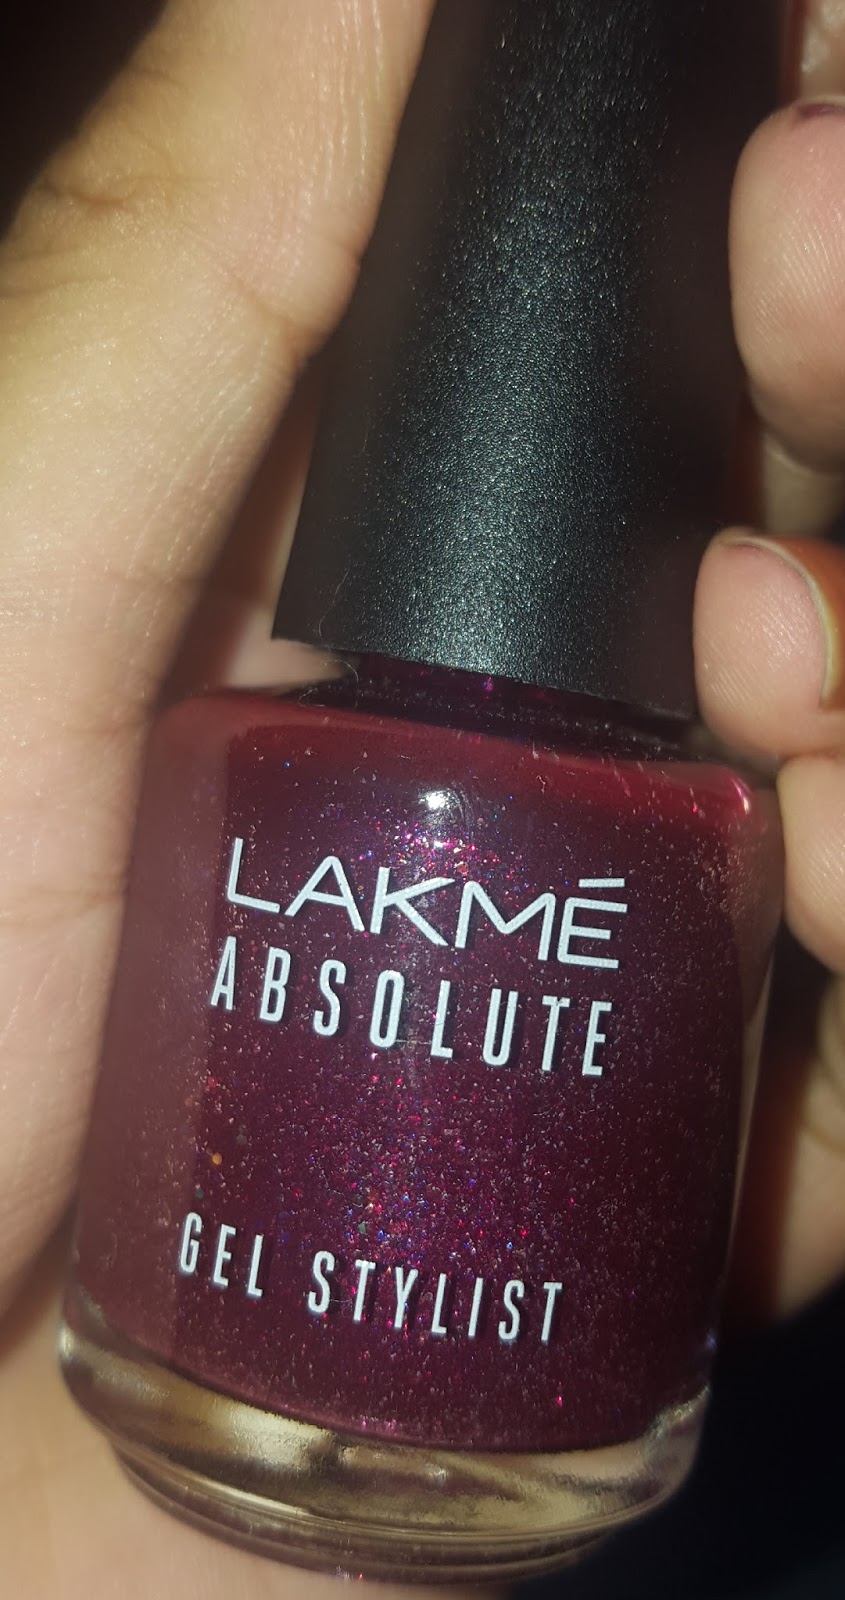 Lakme Absolute Gel Stylist Top Coat And Nail Color Remover With Vitamin E  Review - YouTube